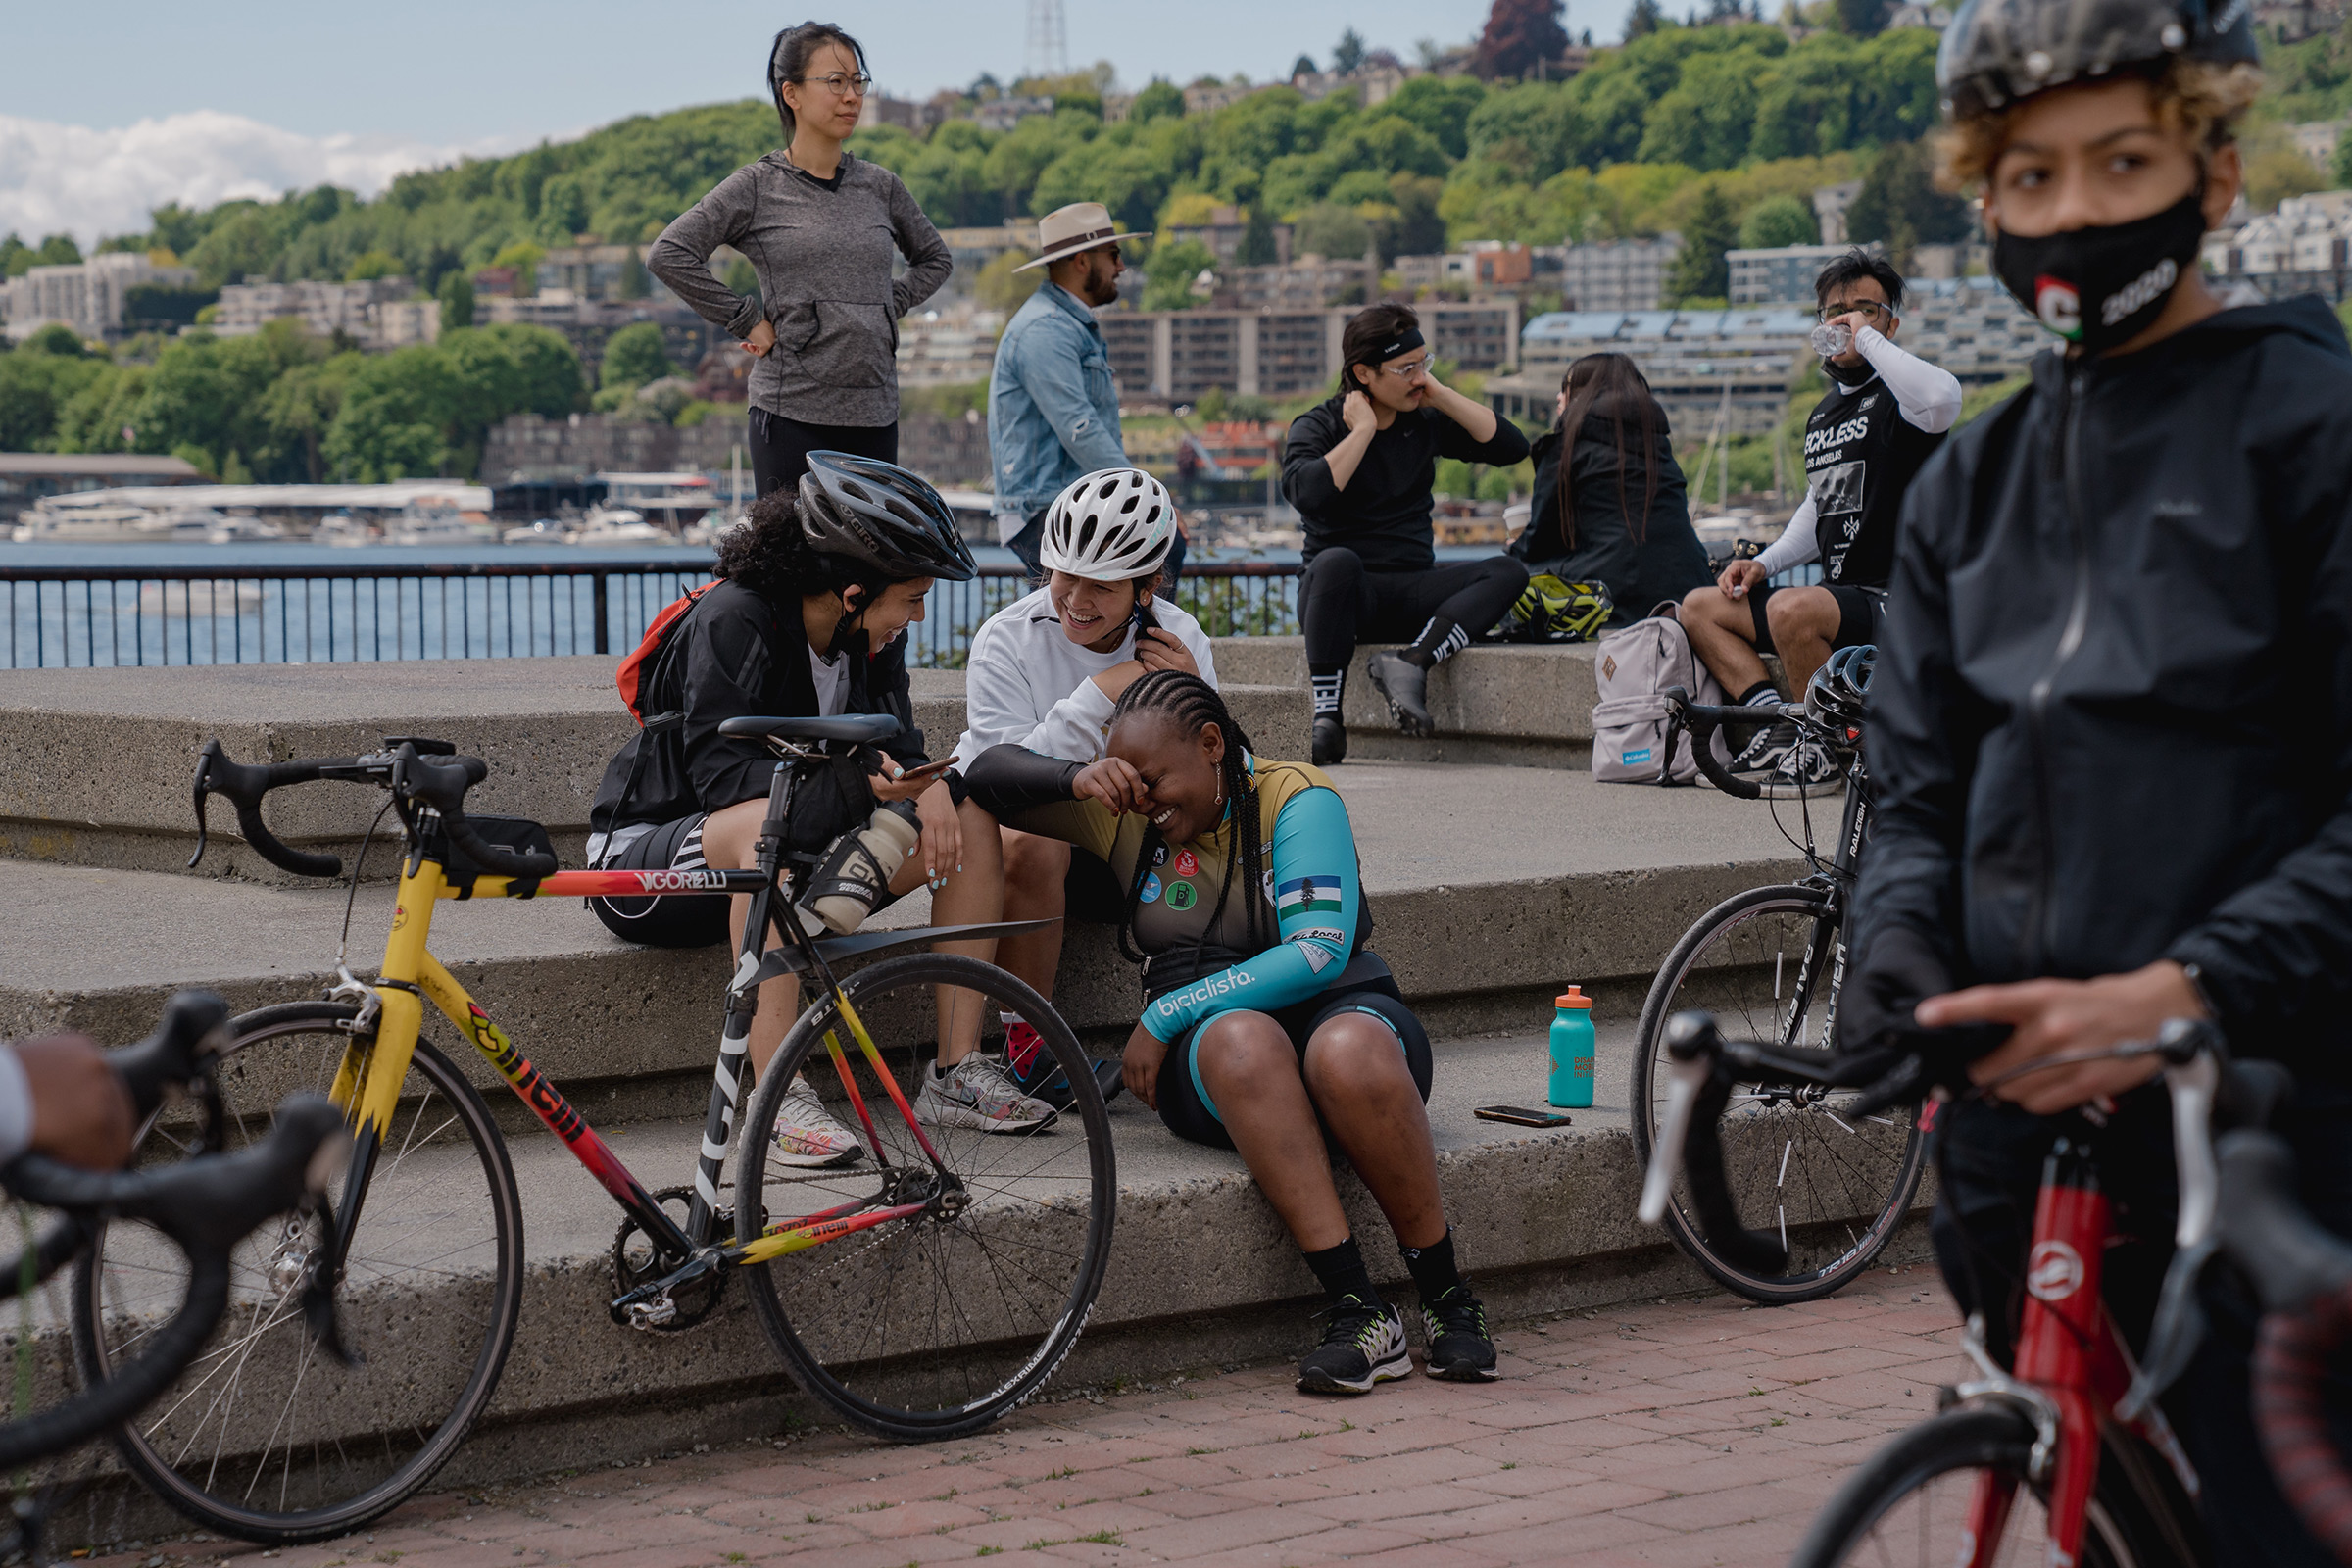 Members of the NorthStar Cycling Club at Gas Works Park in Seattle. (Jovelle Tamayo for TIME)